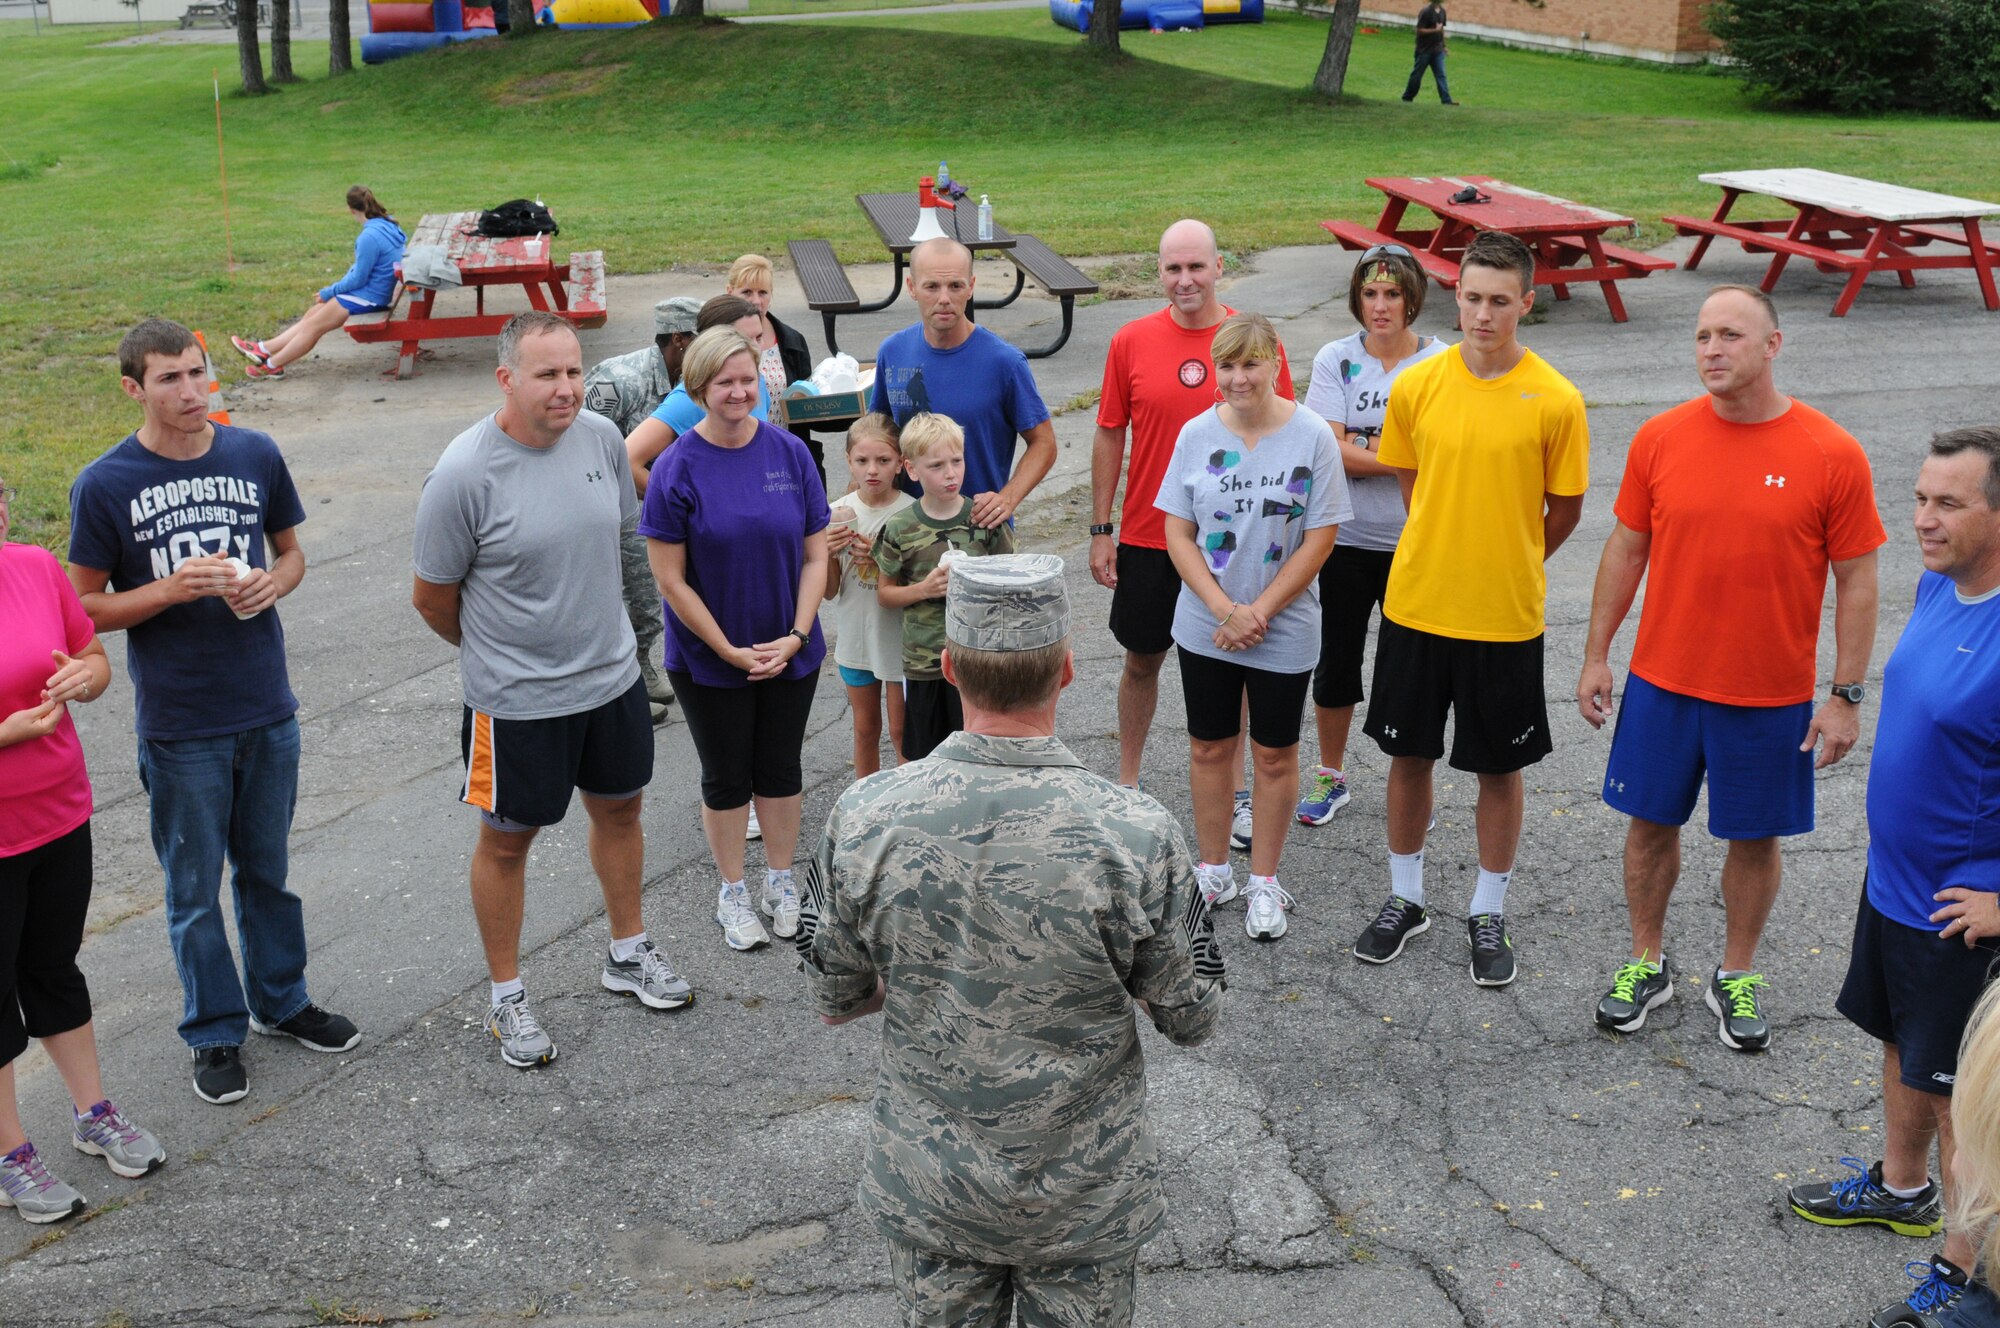 Chief Master Sgt. of the Air Force James A. Cody meets Airmen and family members after the Family Fun Run at the 174th Attack Wing, Hancock Field on Sep. 7, 2013. Cody visited Hancock Field to meet with Airmen, get the pulse of the enlisted force and answer any questions. (Photo by New York Air National Guard Tech. Sgt. Justin A. Huett)